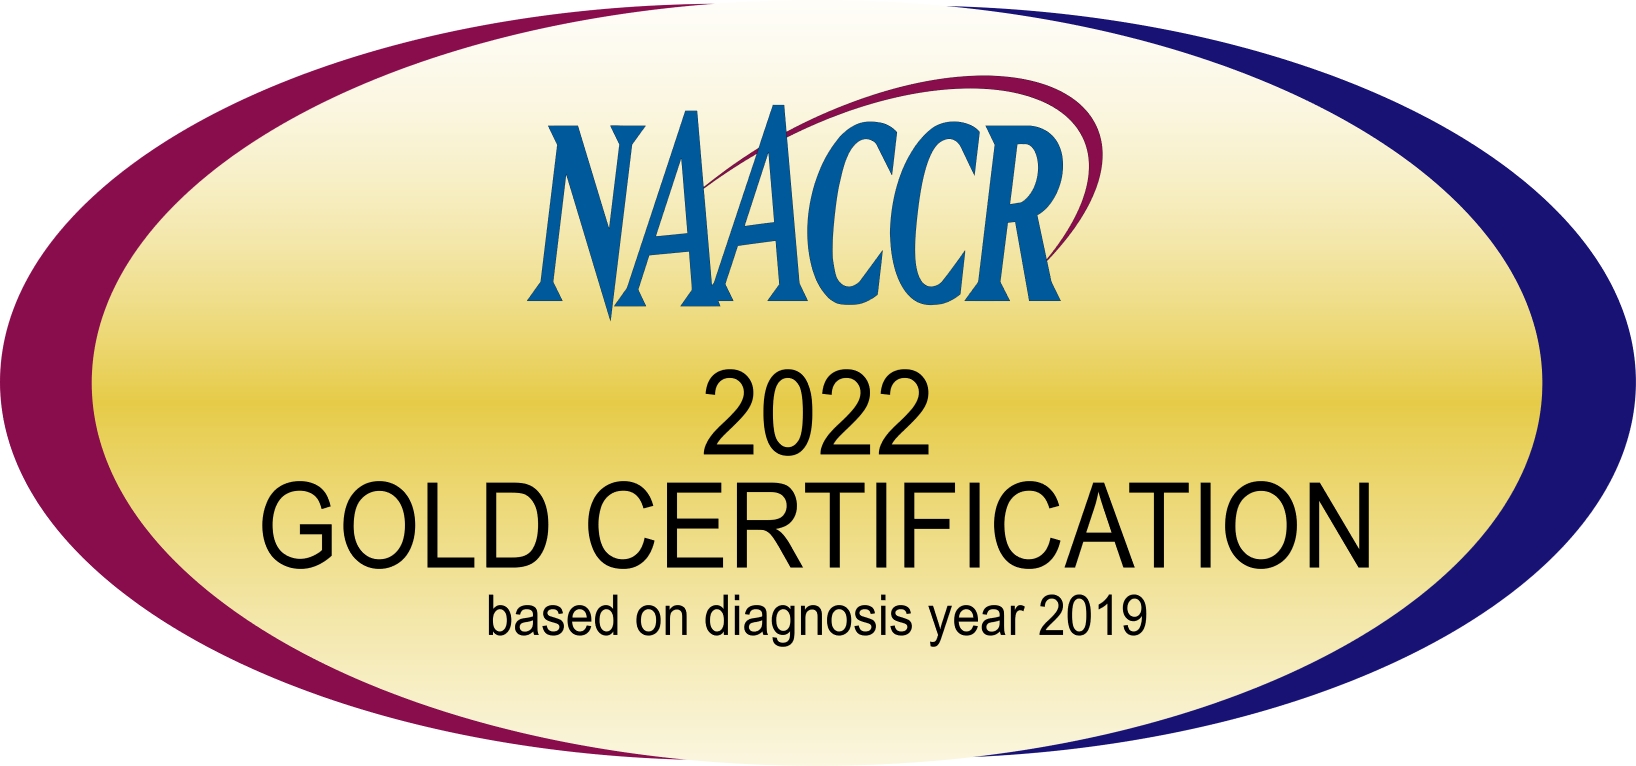 NAACCR 2022 Gold Certification